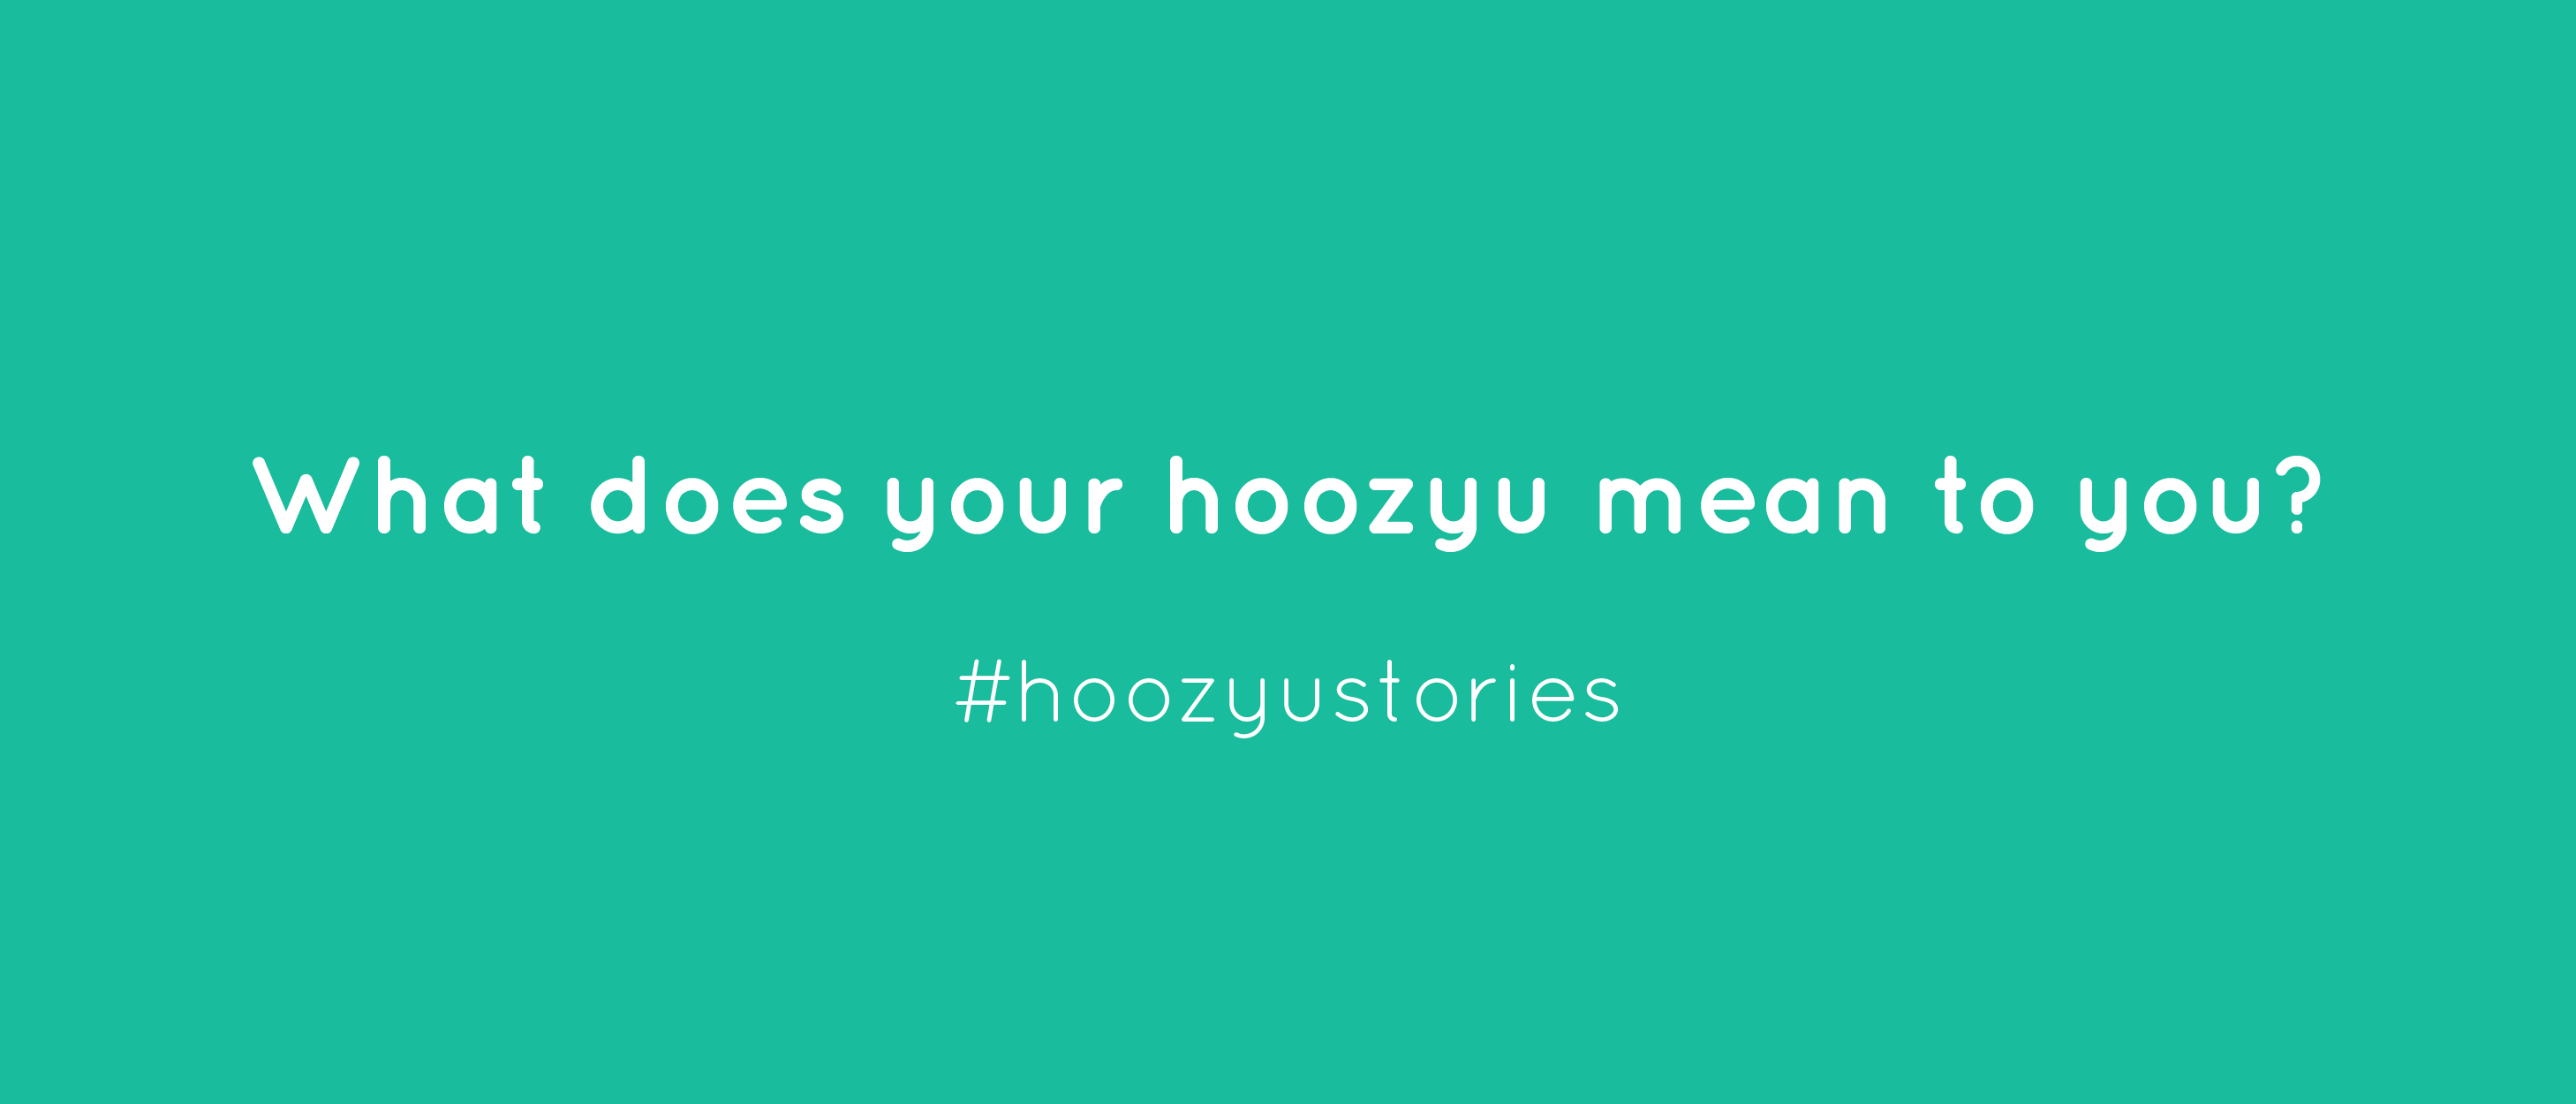 What does your hoozyu mean to you? #hoozyustories